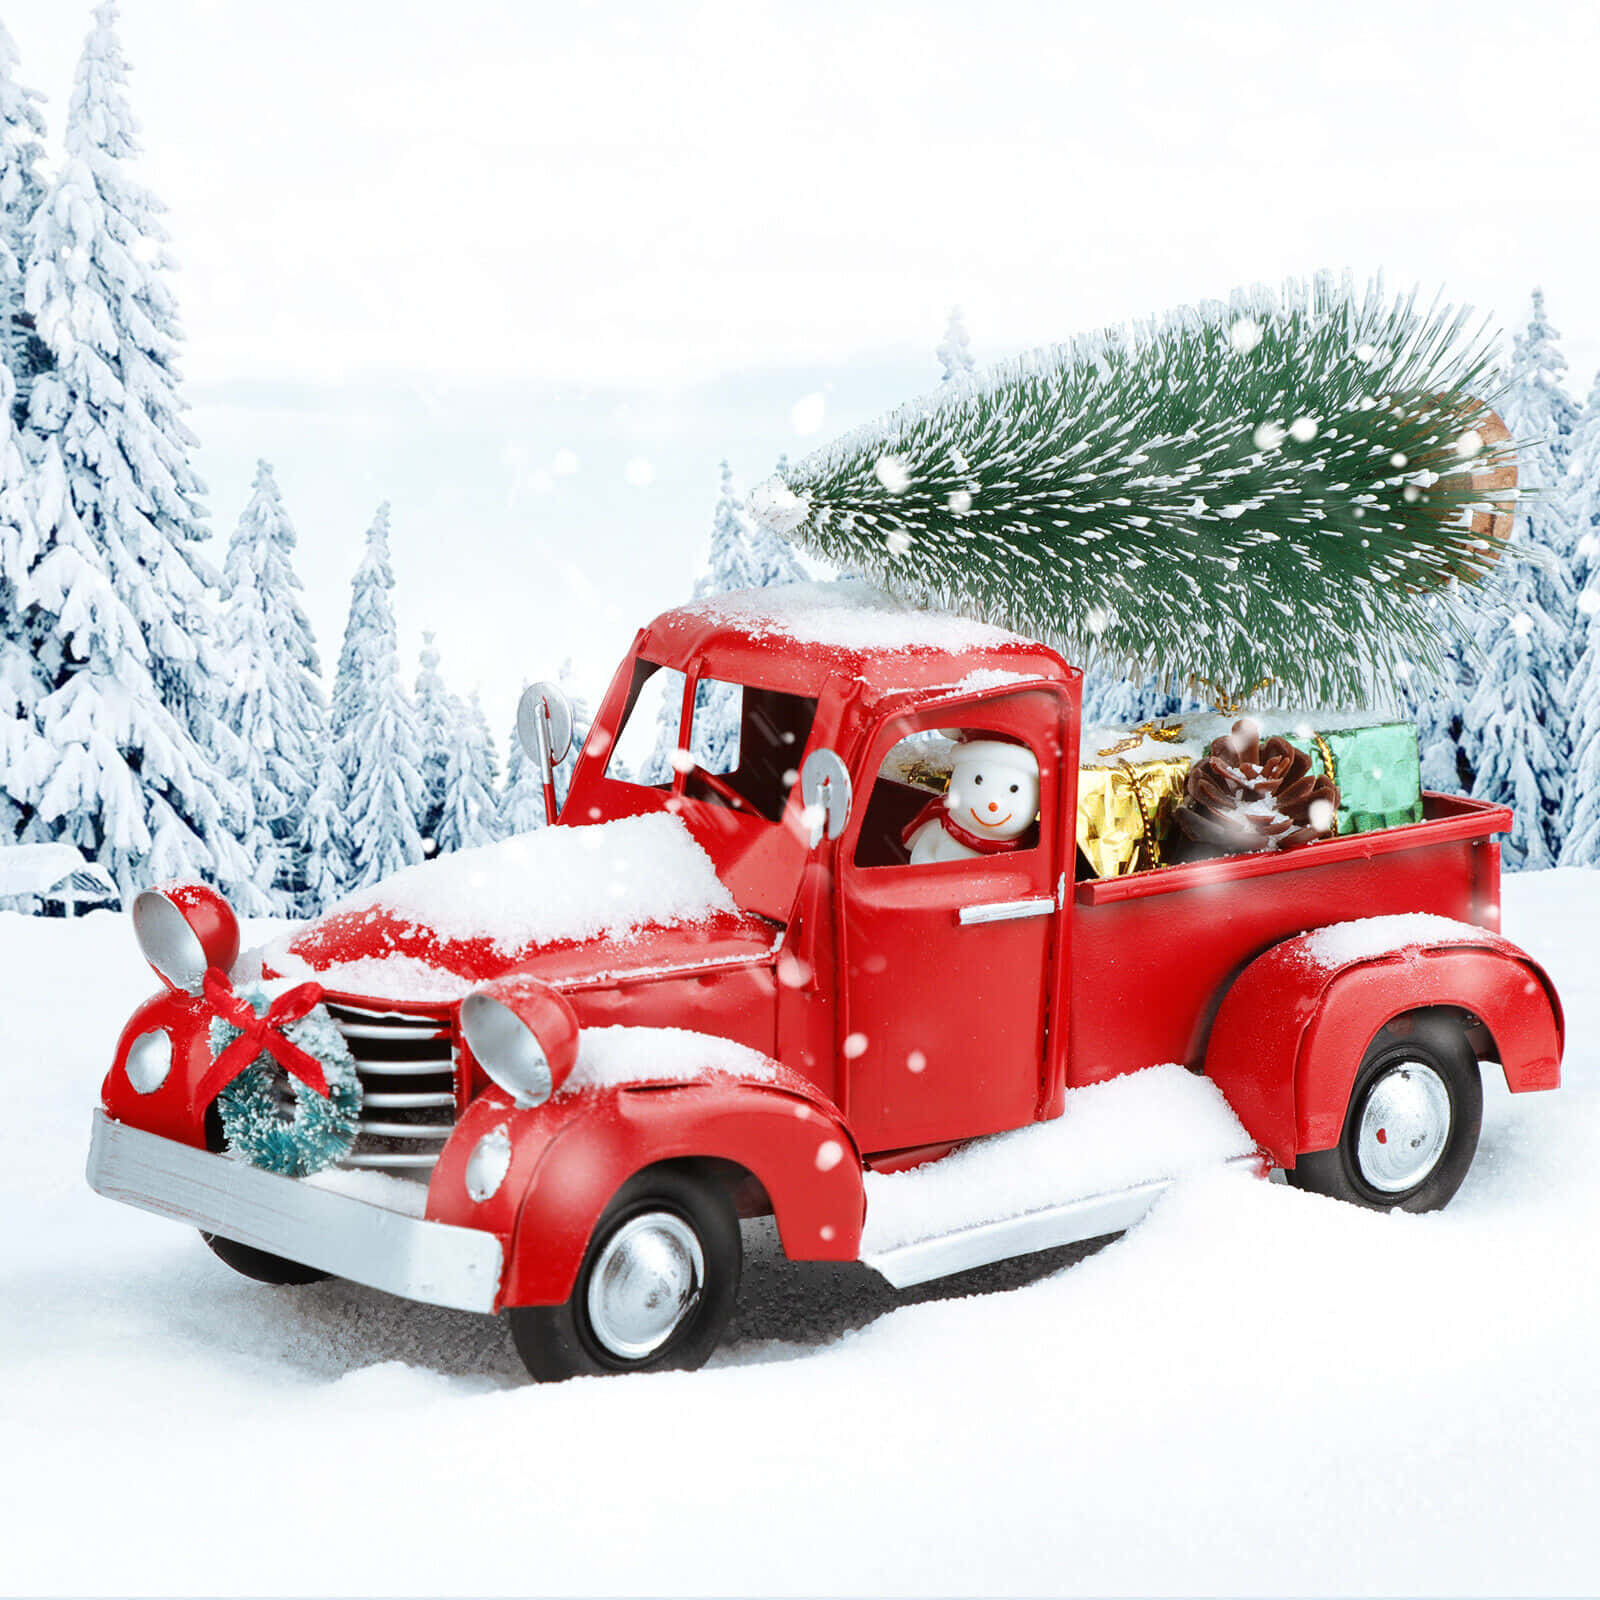 Christmas is rendered extra-special with a vintage holiday truck. Wallpaper